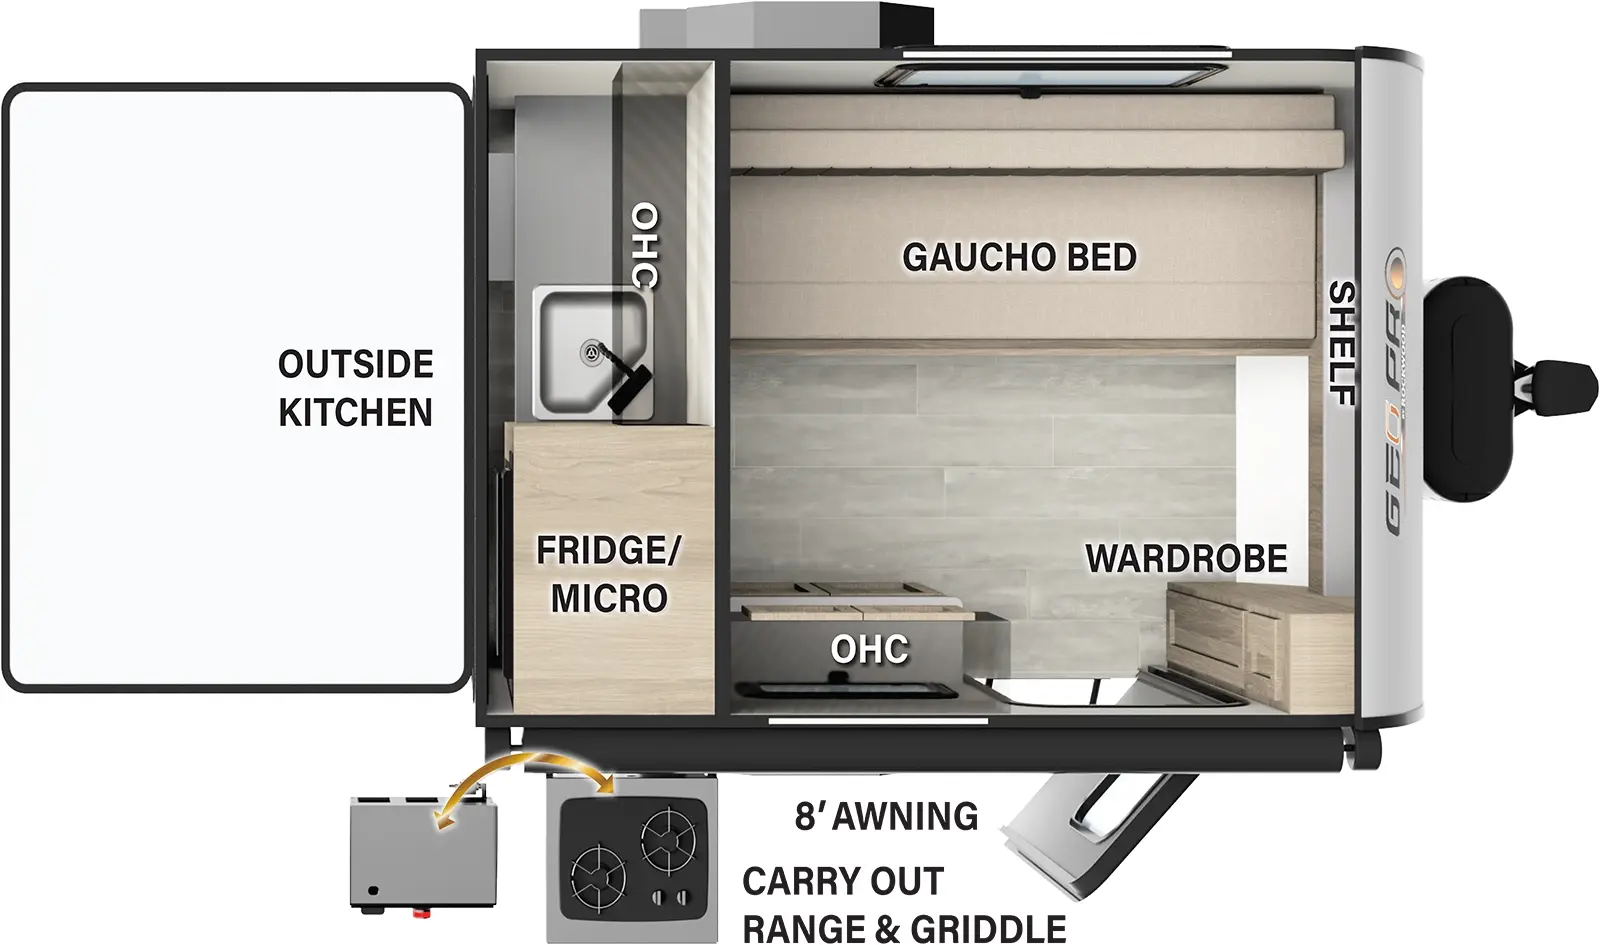 The G12S has one entry and zero slideouts. Exterior features 8 foot awning, carry-out range and griddle, and rear outside kitchen with overhead cabinet, microwave and refrigerator. Interior layout front to back: front shelf, off-door side gaucho bed, and door side wardrobe, entry, and overhead cabinet.